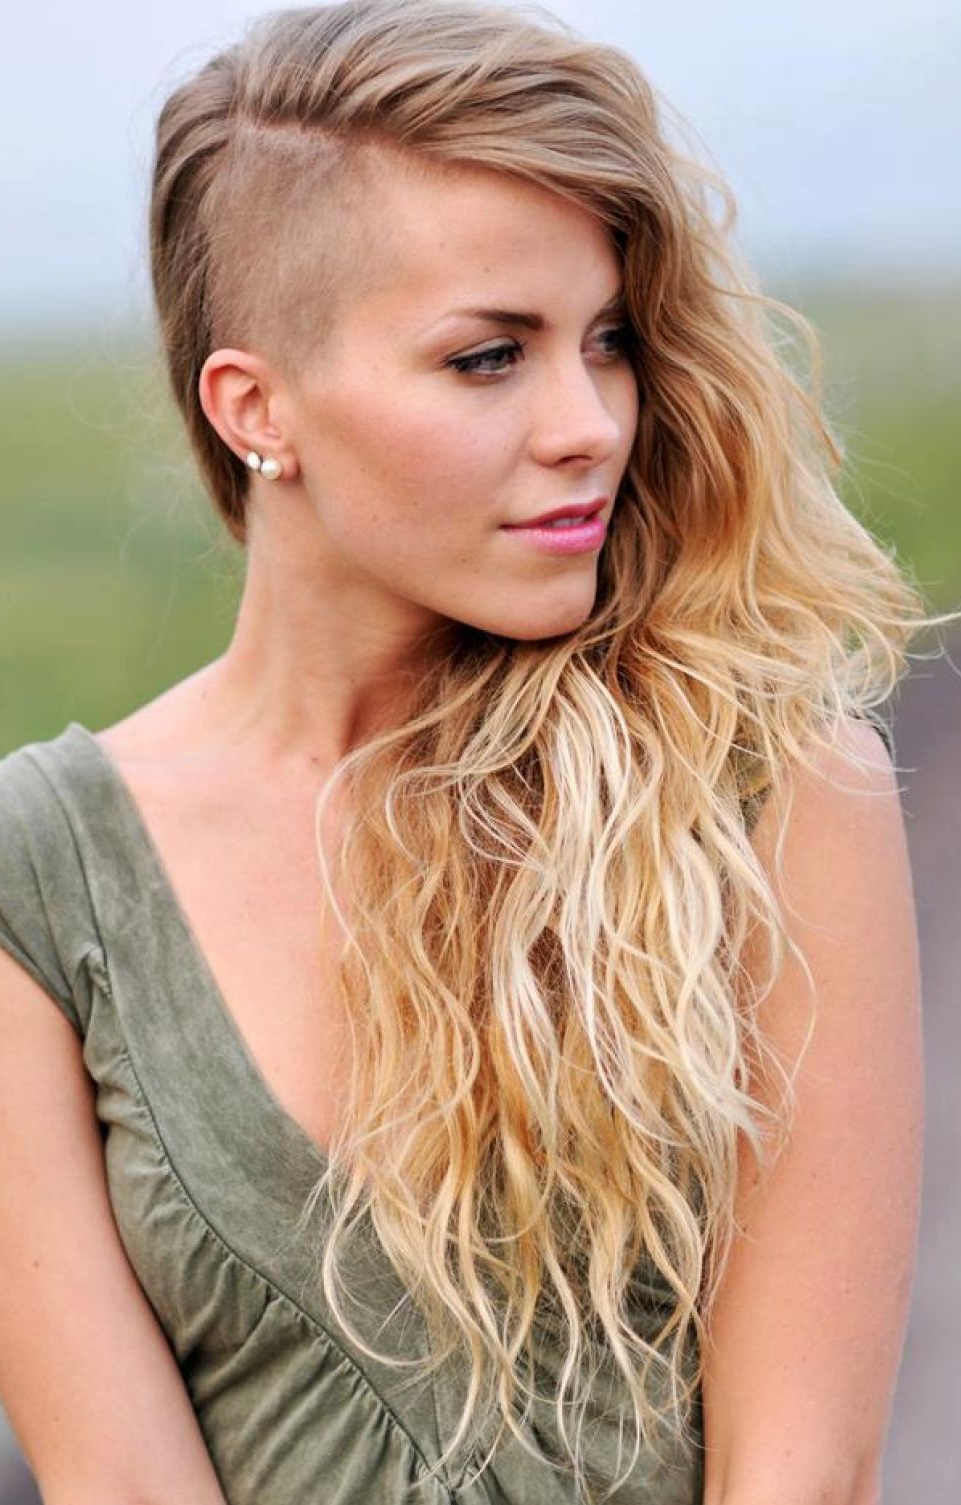 20 Cute Shaved Hairstyles for Women